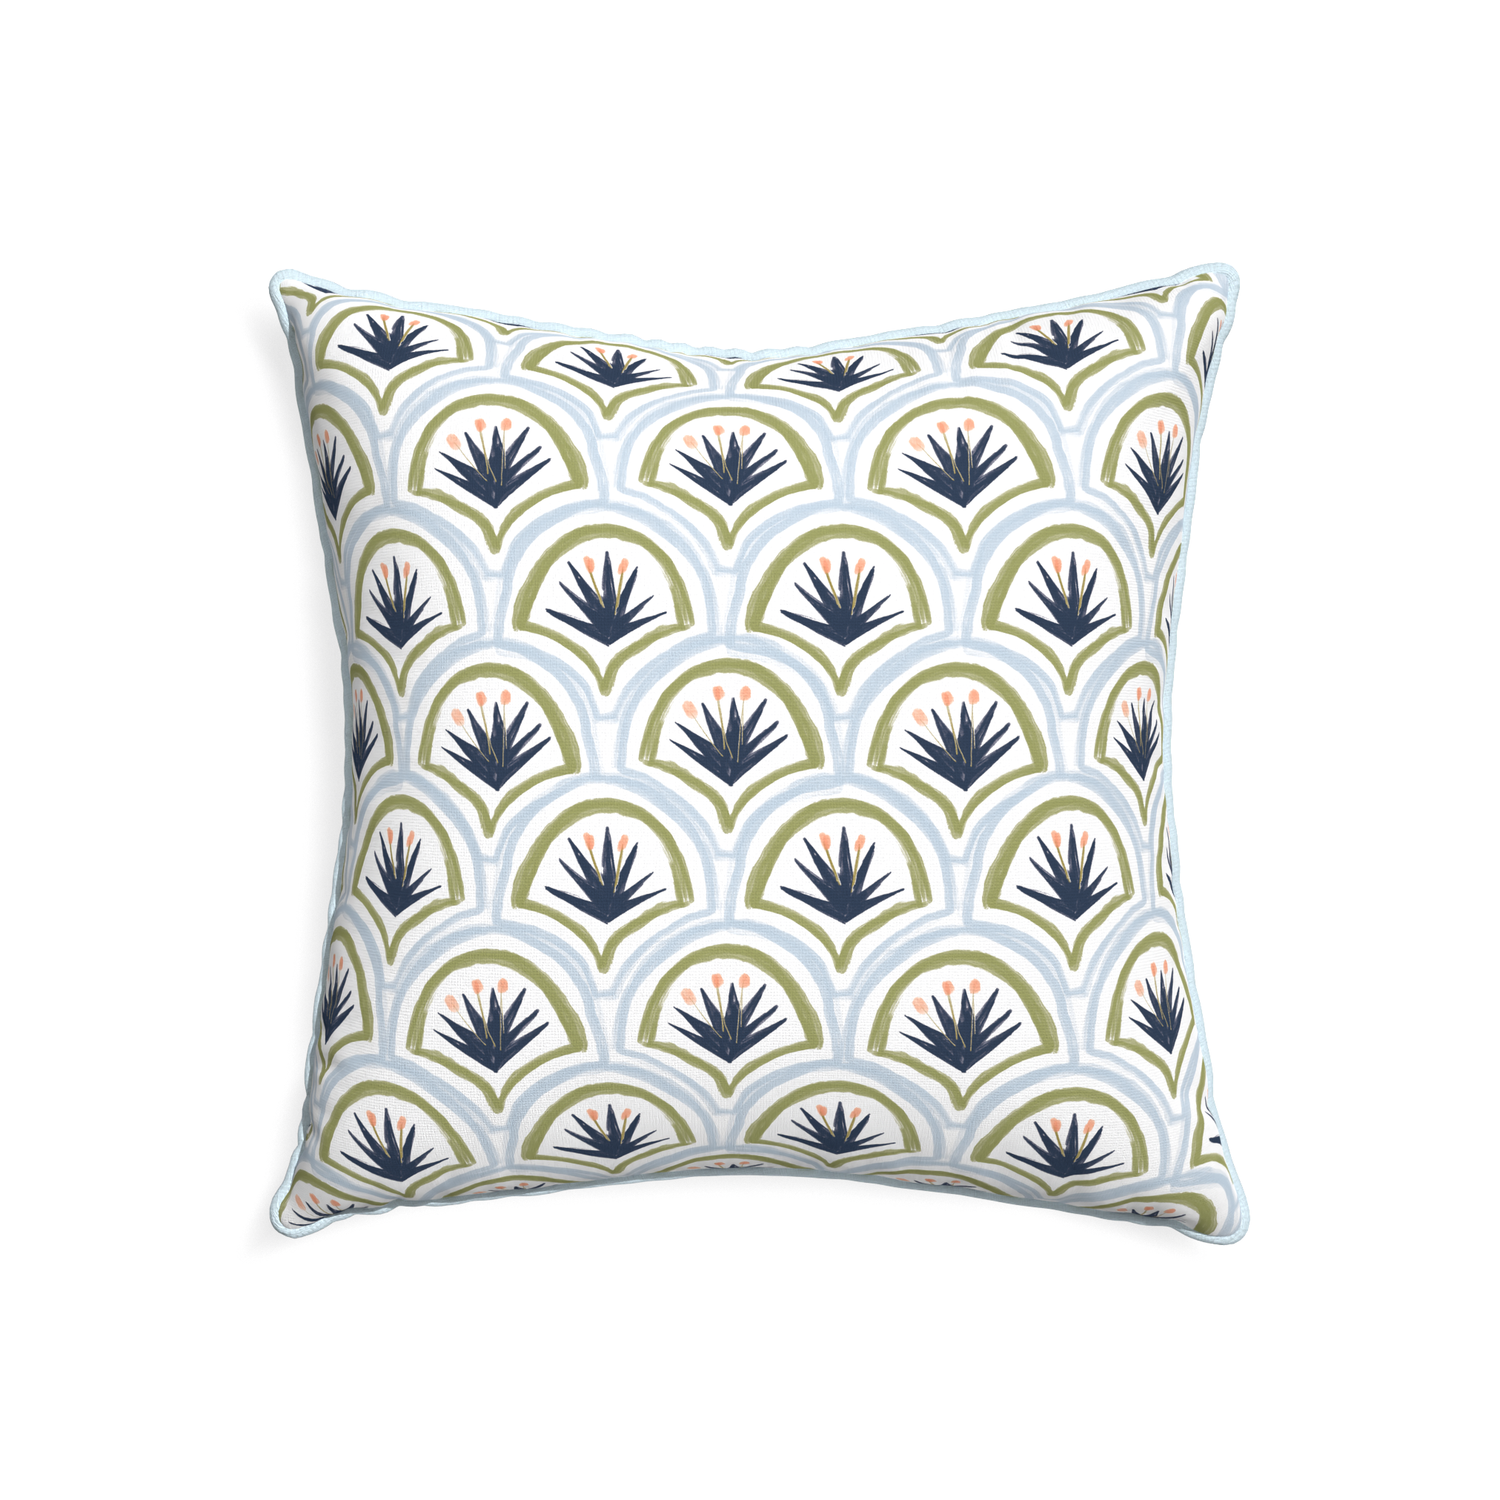 22-square thatcher midnight custom art deco palm patternpillow with powder piping on white background